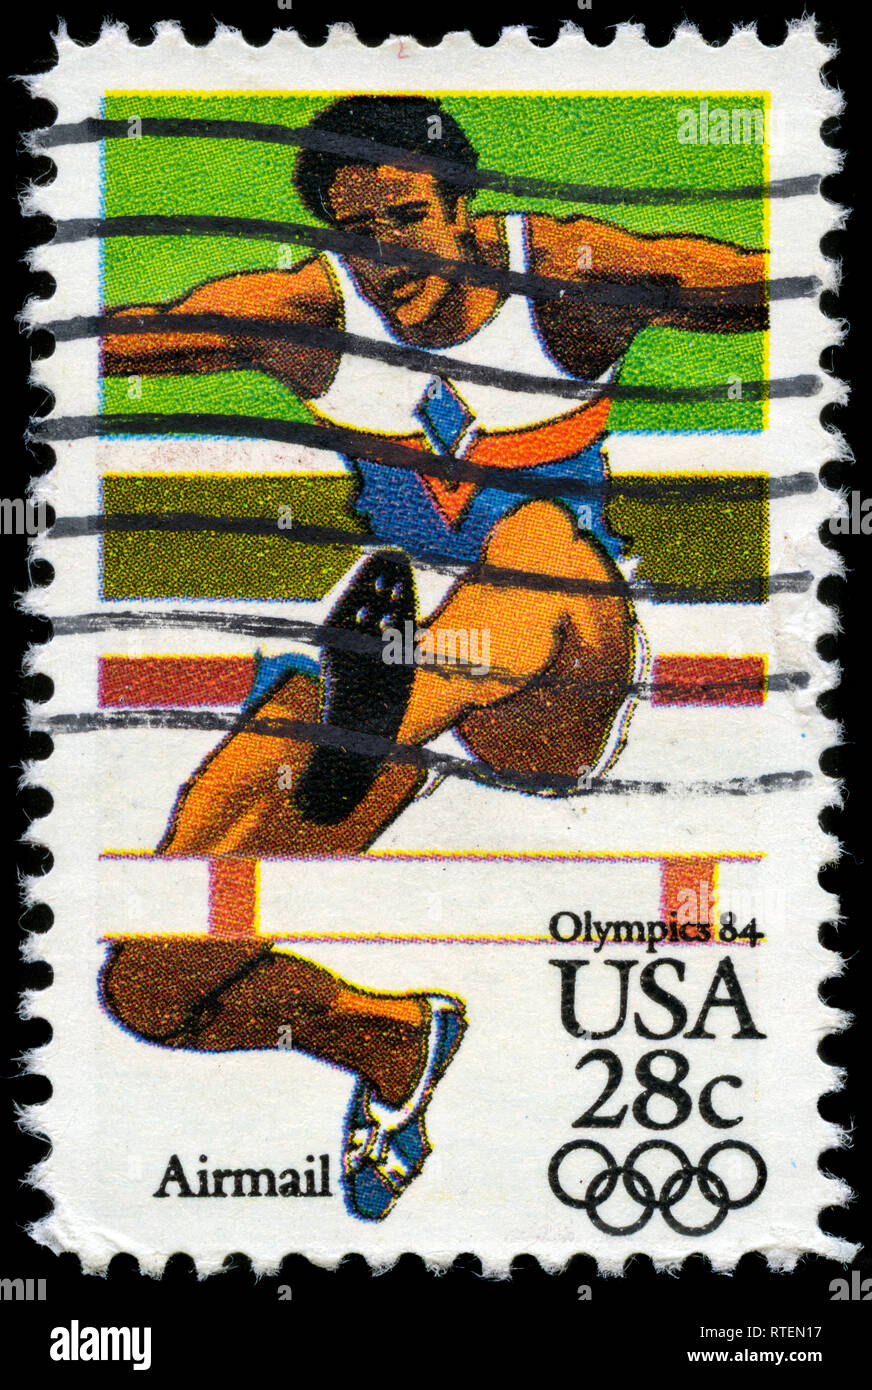 Postage stamp from United States of America (USA) in the Olympic Games 1984 - Los Angeles series issued in 1983 Stock Photo